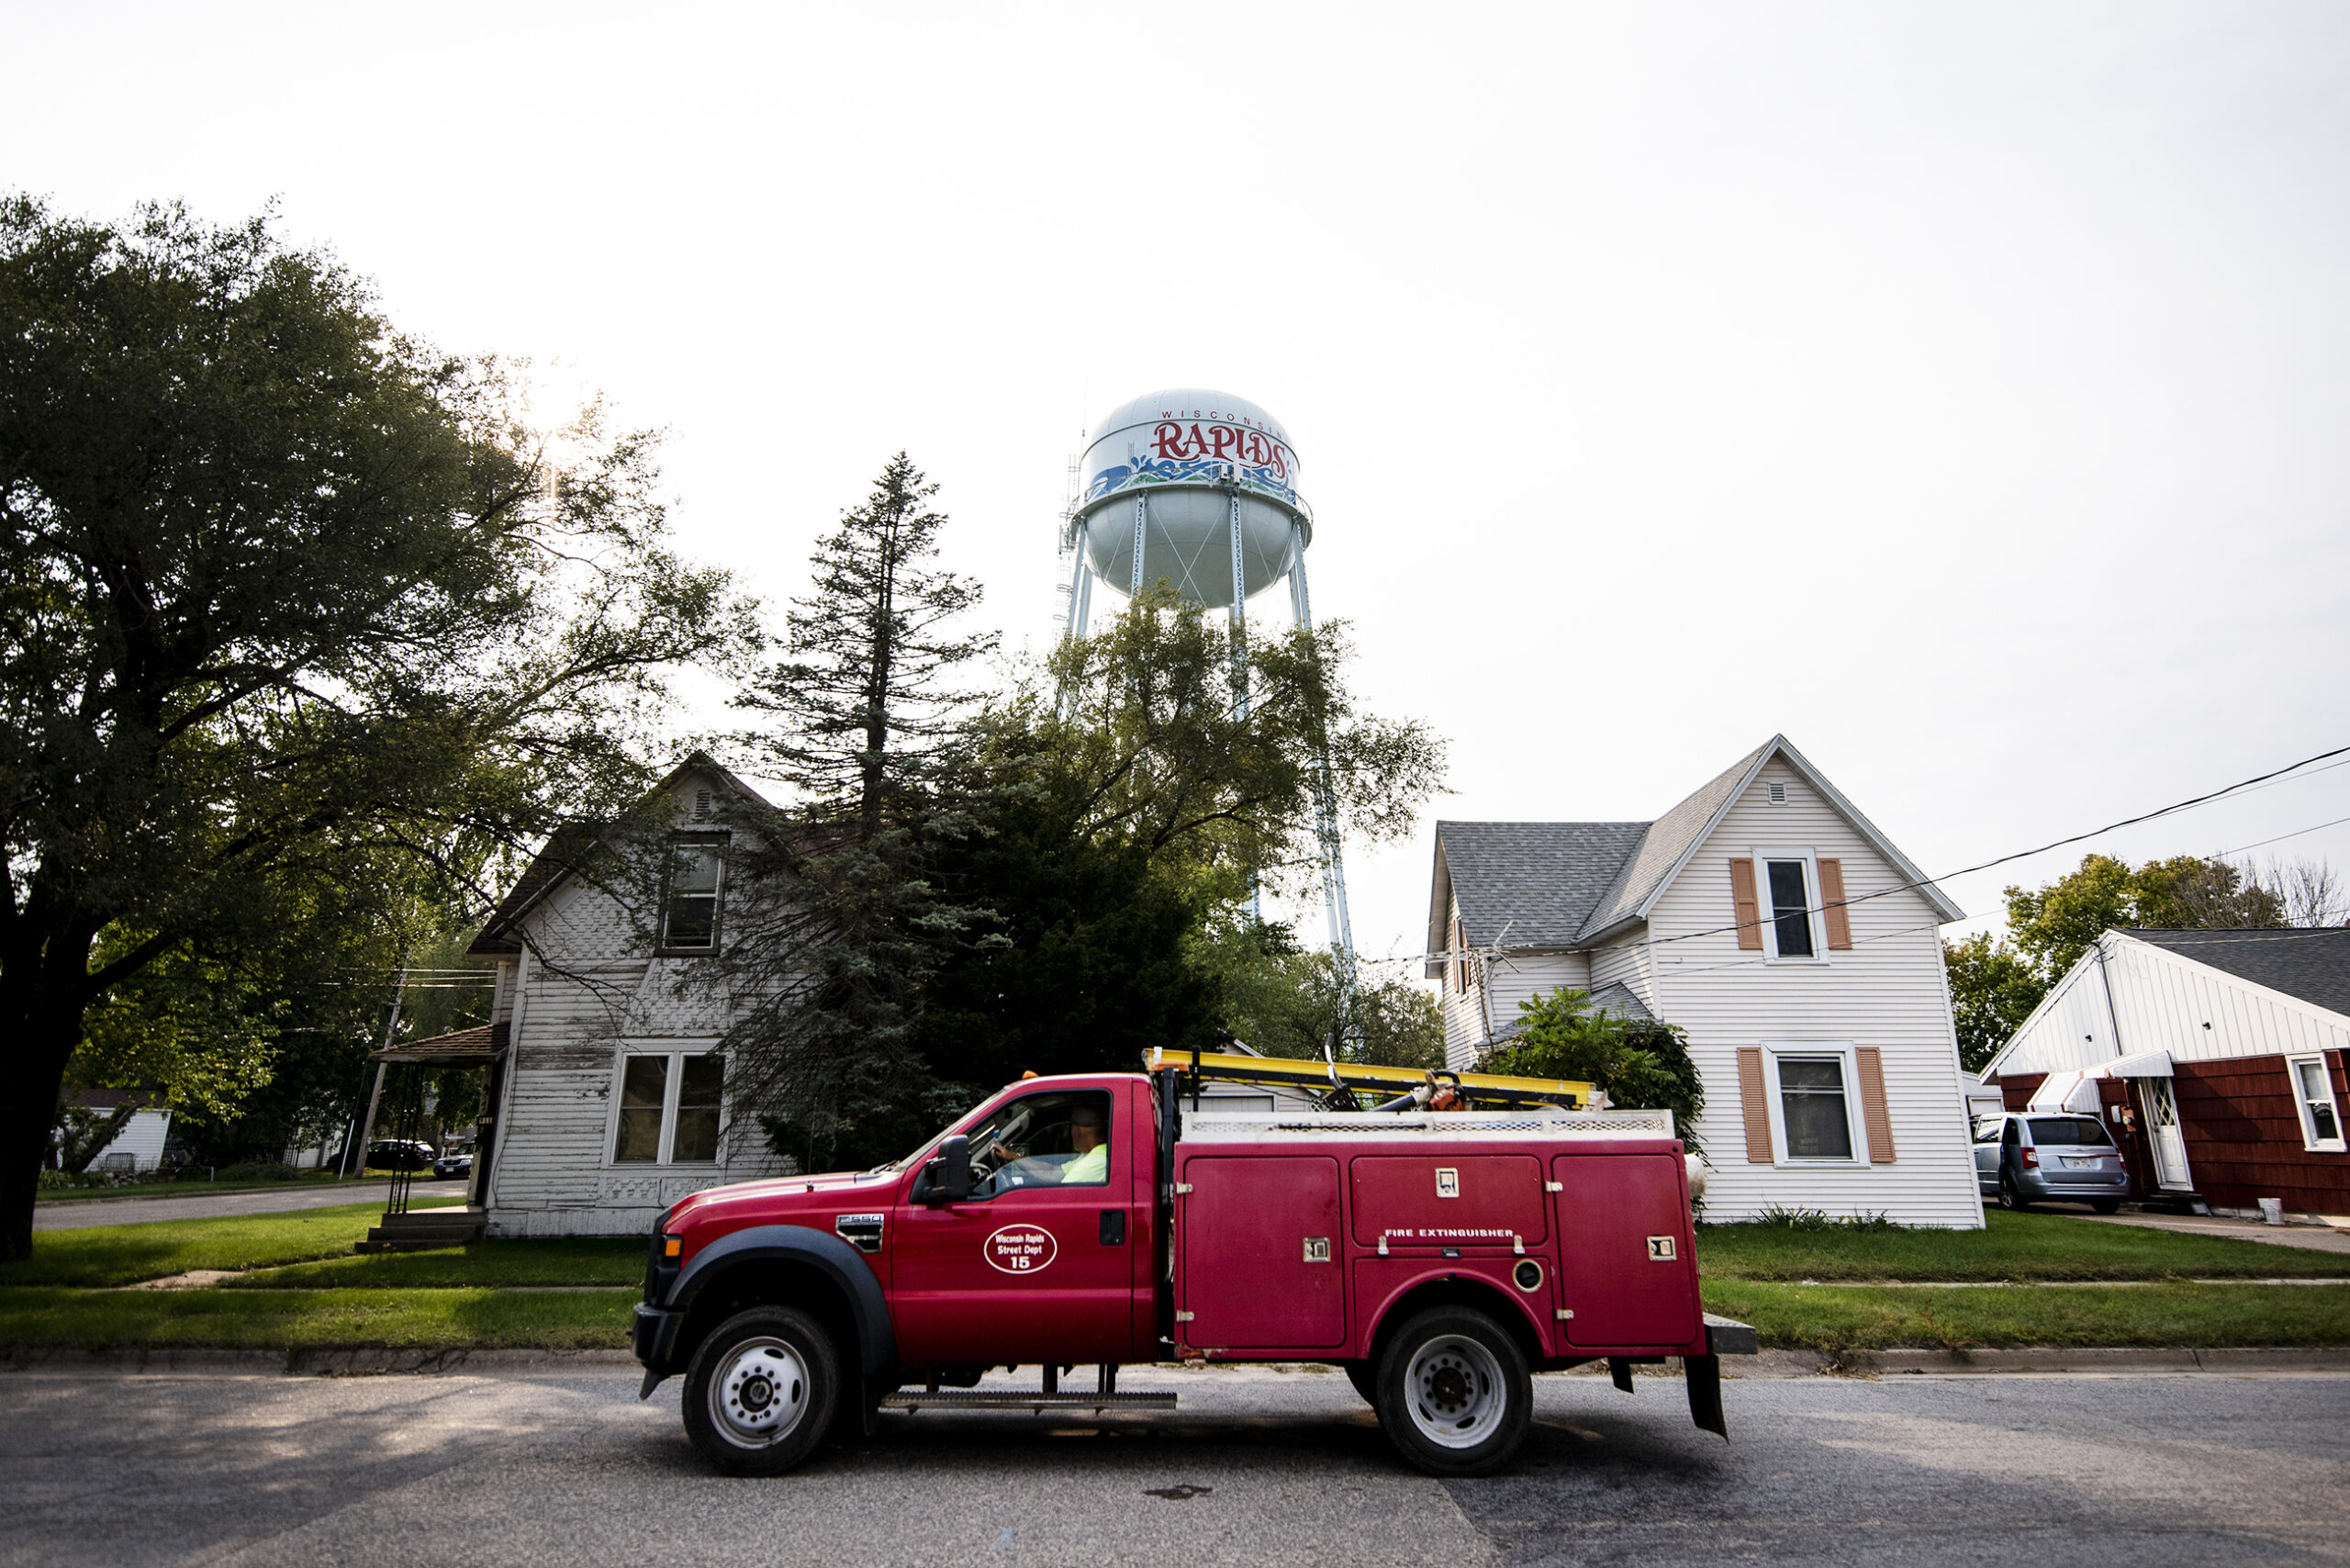 a bright red truck passes by two homes and a water tower that says 